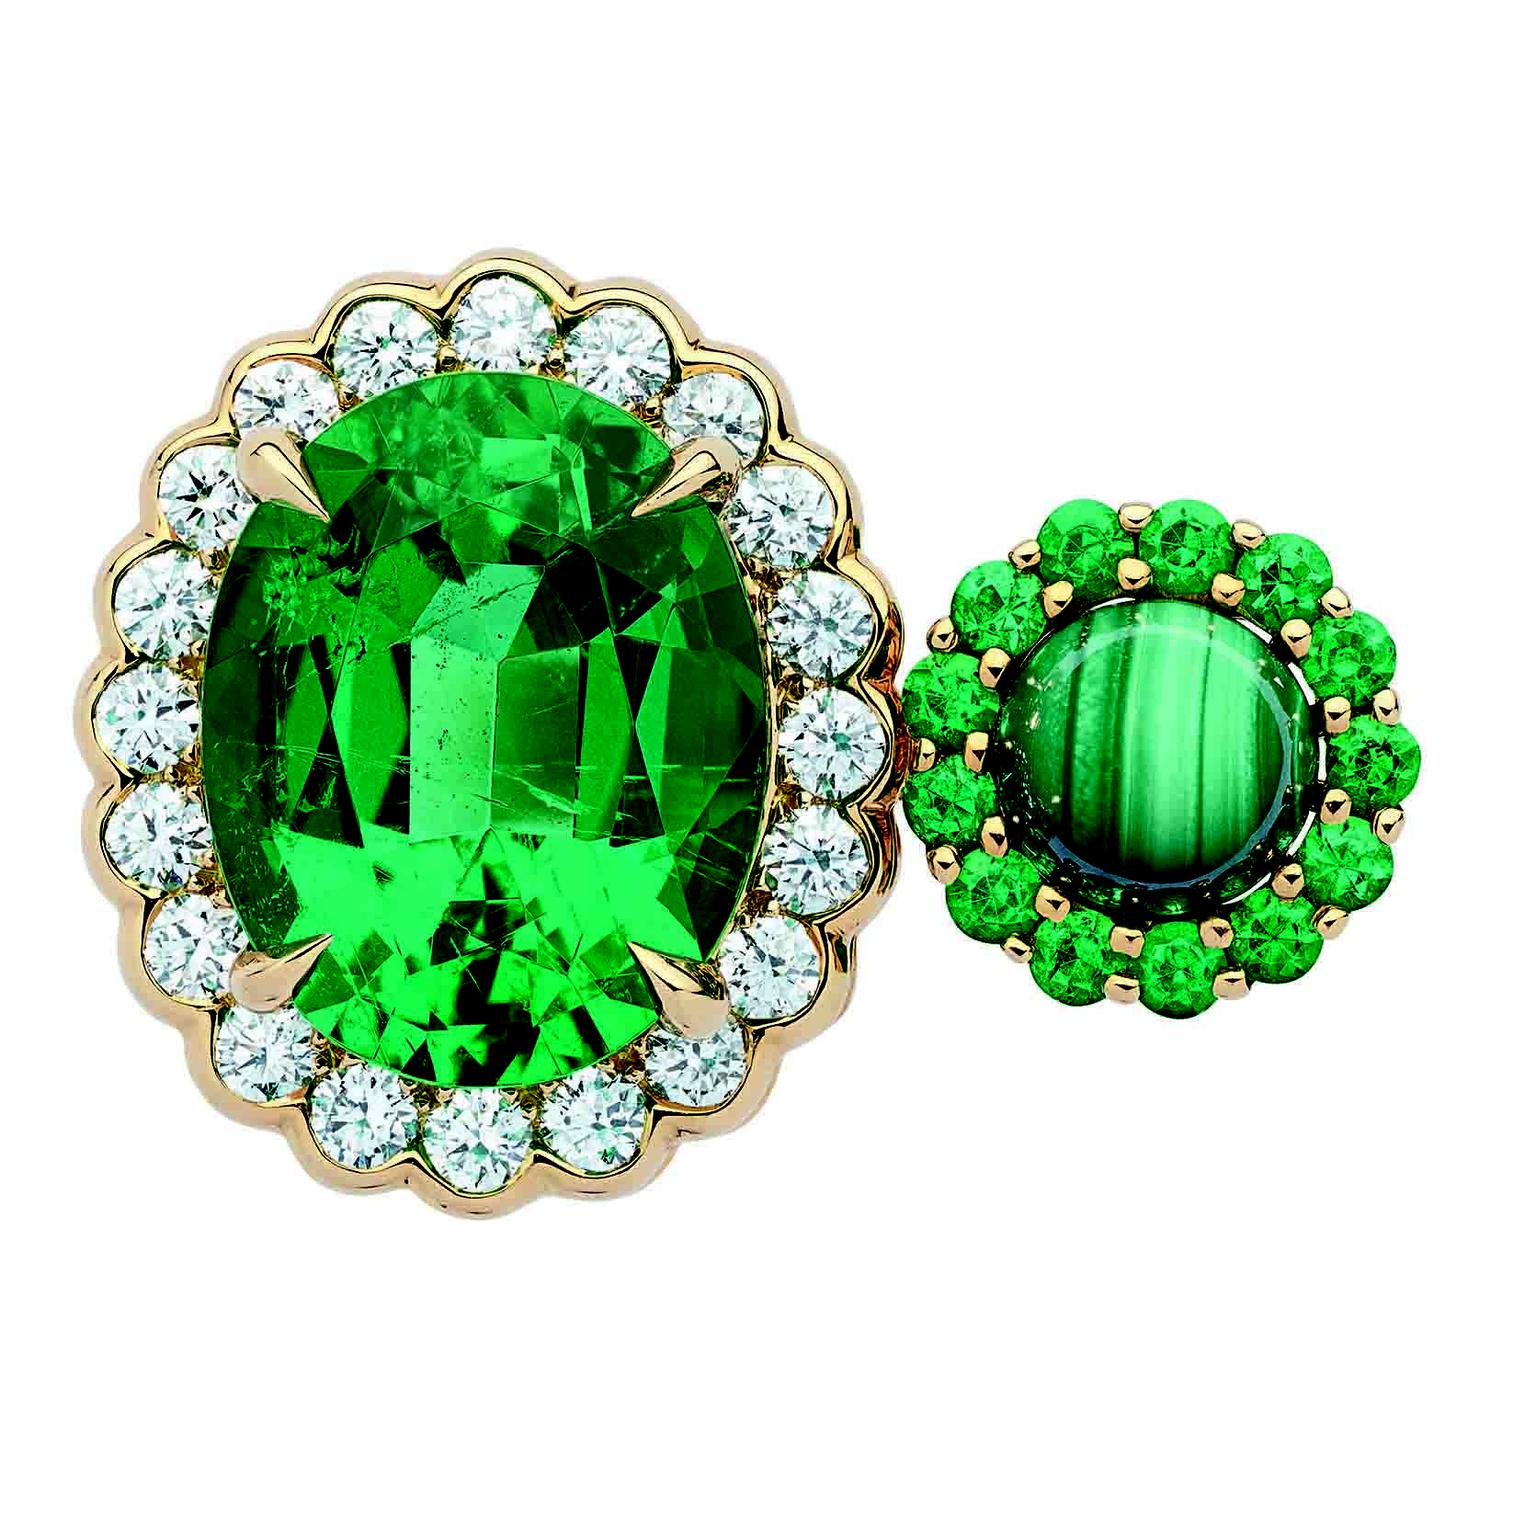 Dior et Moi high jewellery between-the-finger ring set with emeralds